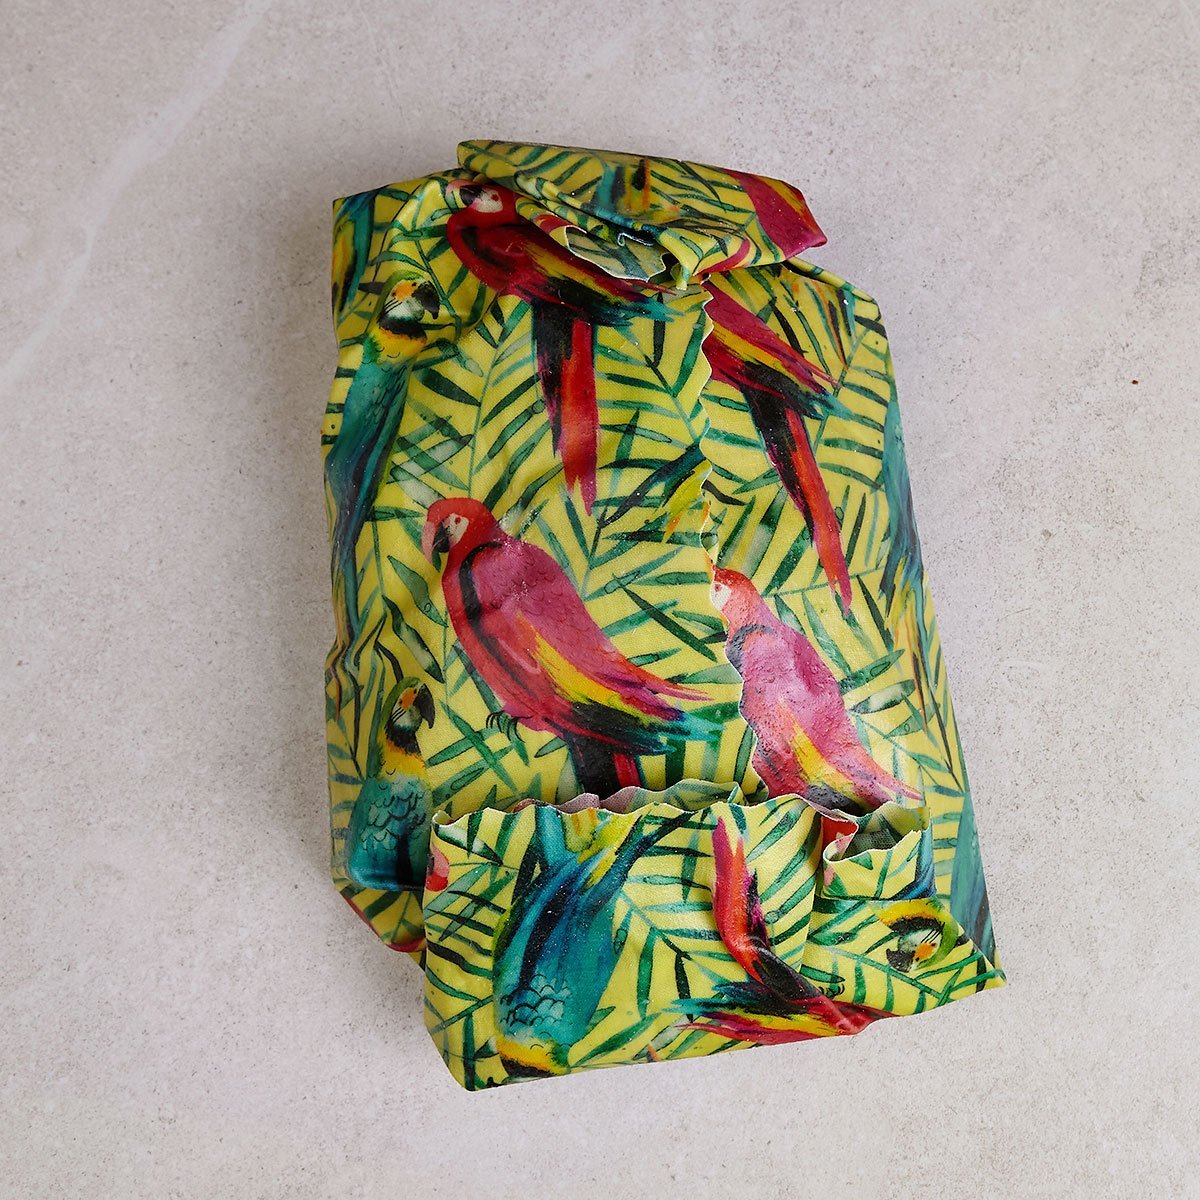 Jumbo Beeswax Wrap 45x45cm - cover huge vegetables like silverbeet, loaves of bread & platters - Little Bumble Reusable Food Wraps